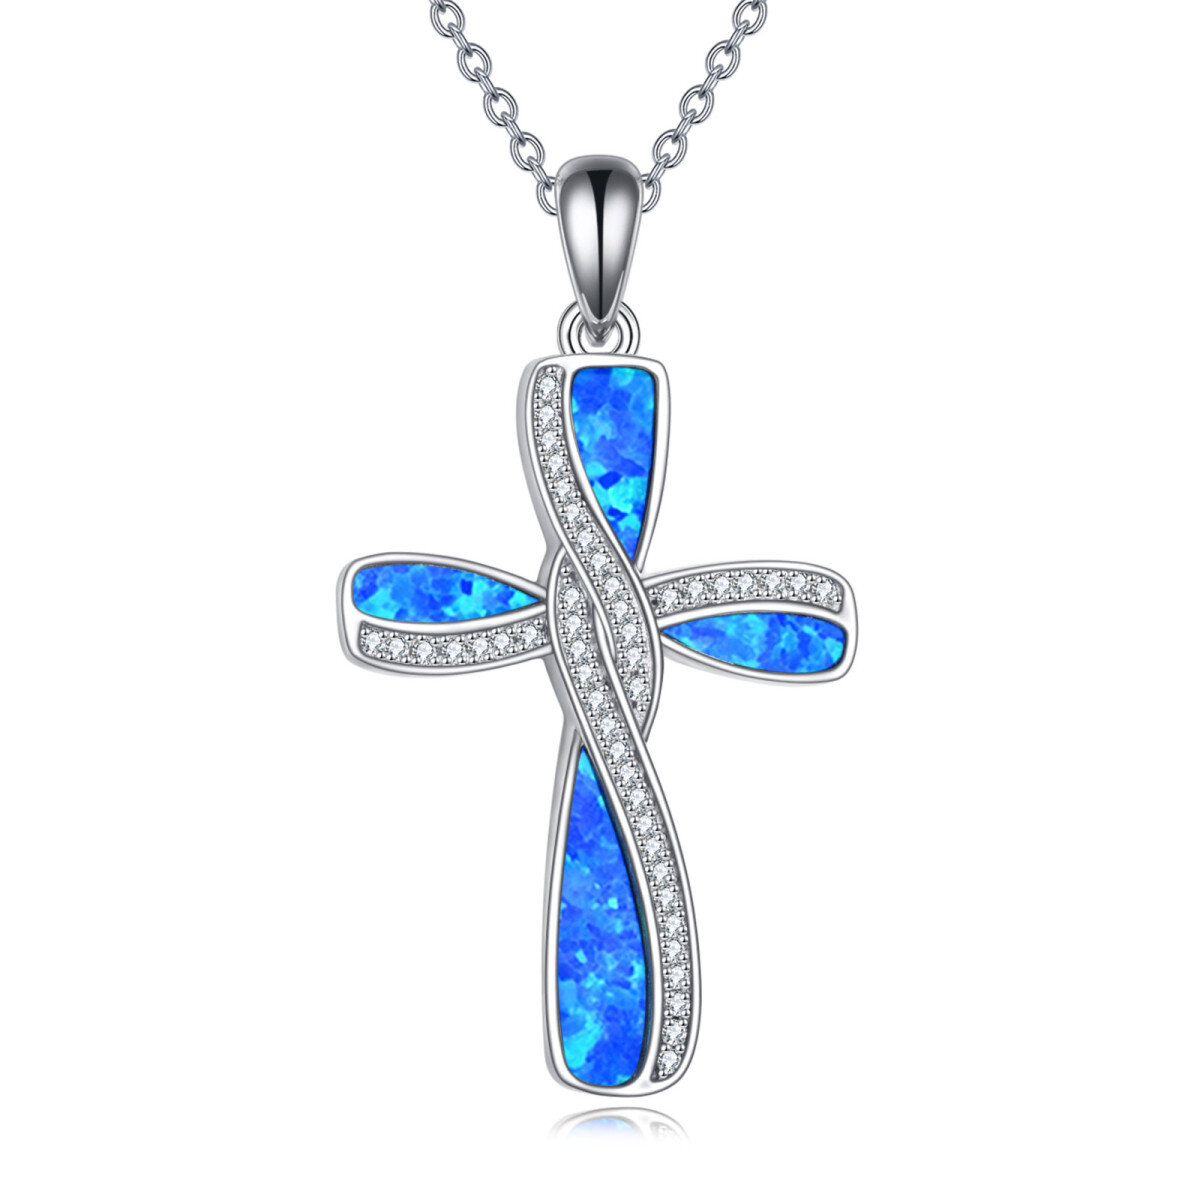 Sterling Silver Opal Cross Pendant Necklace with Engraved Word-1